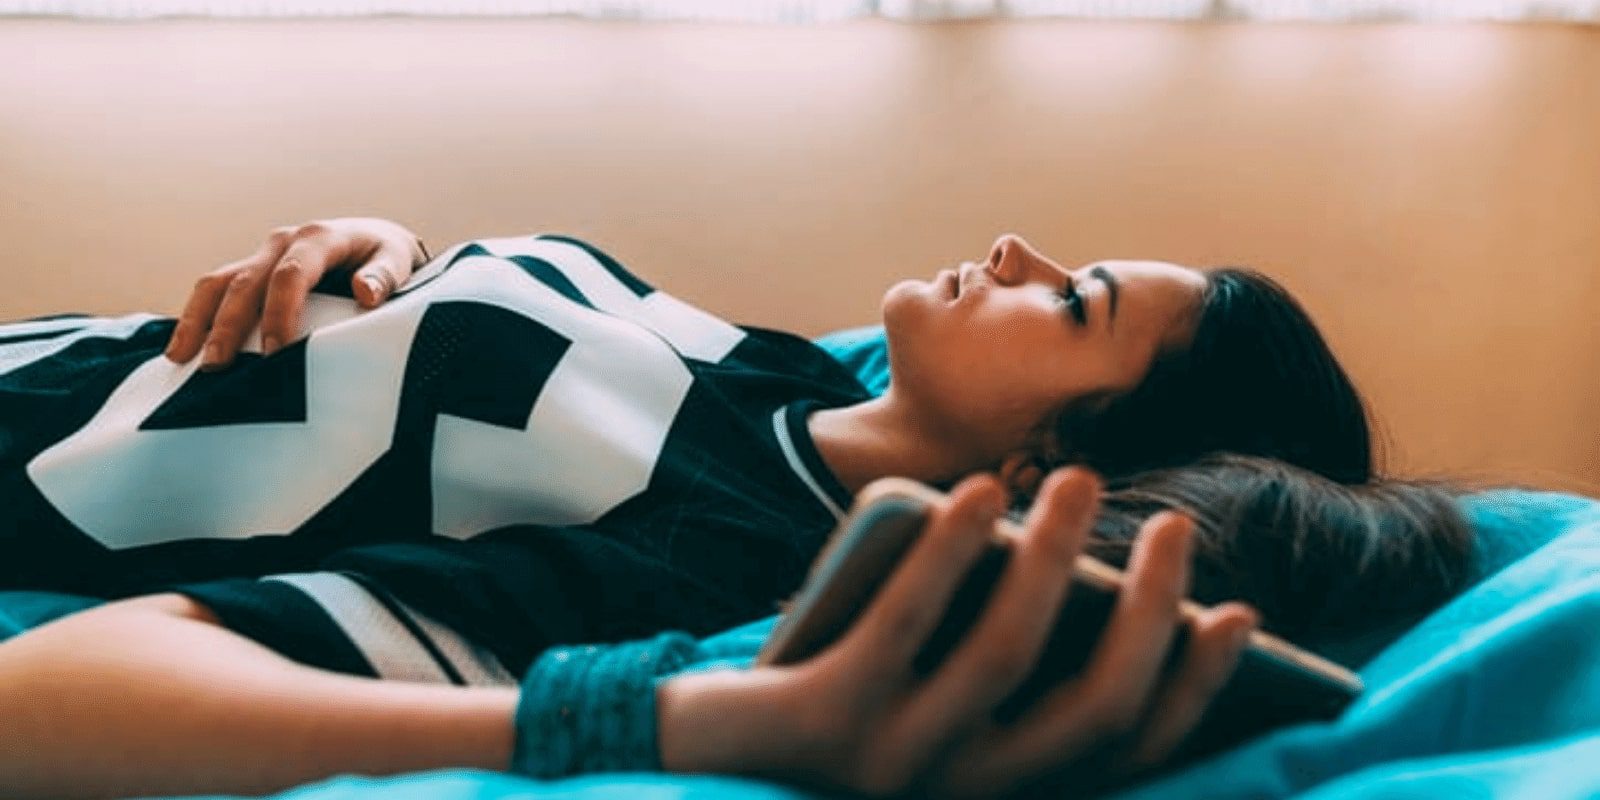 A young female adult laying down on a bed holding her phone